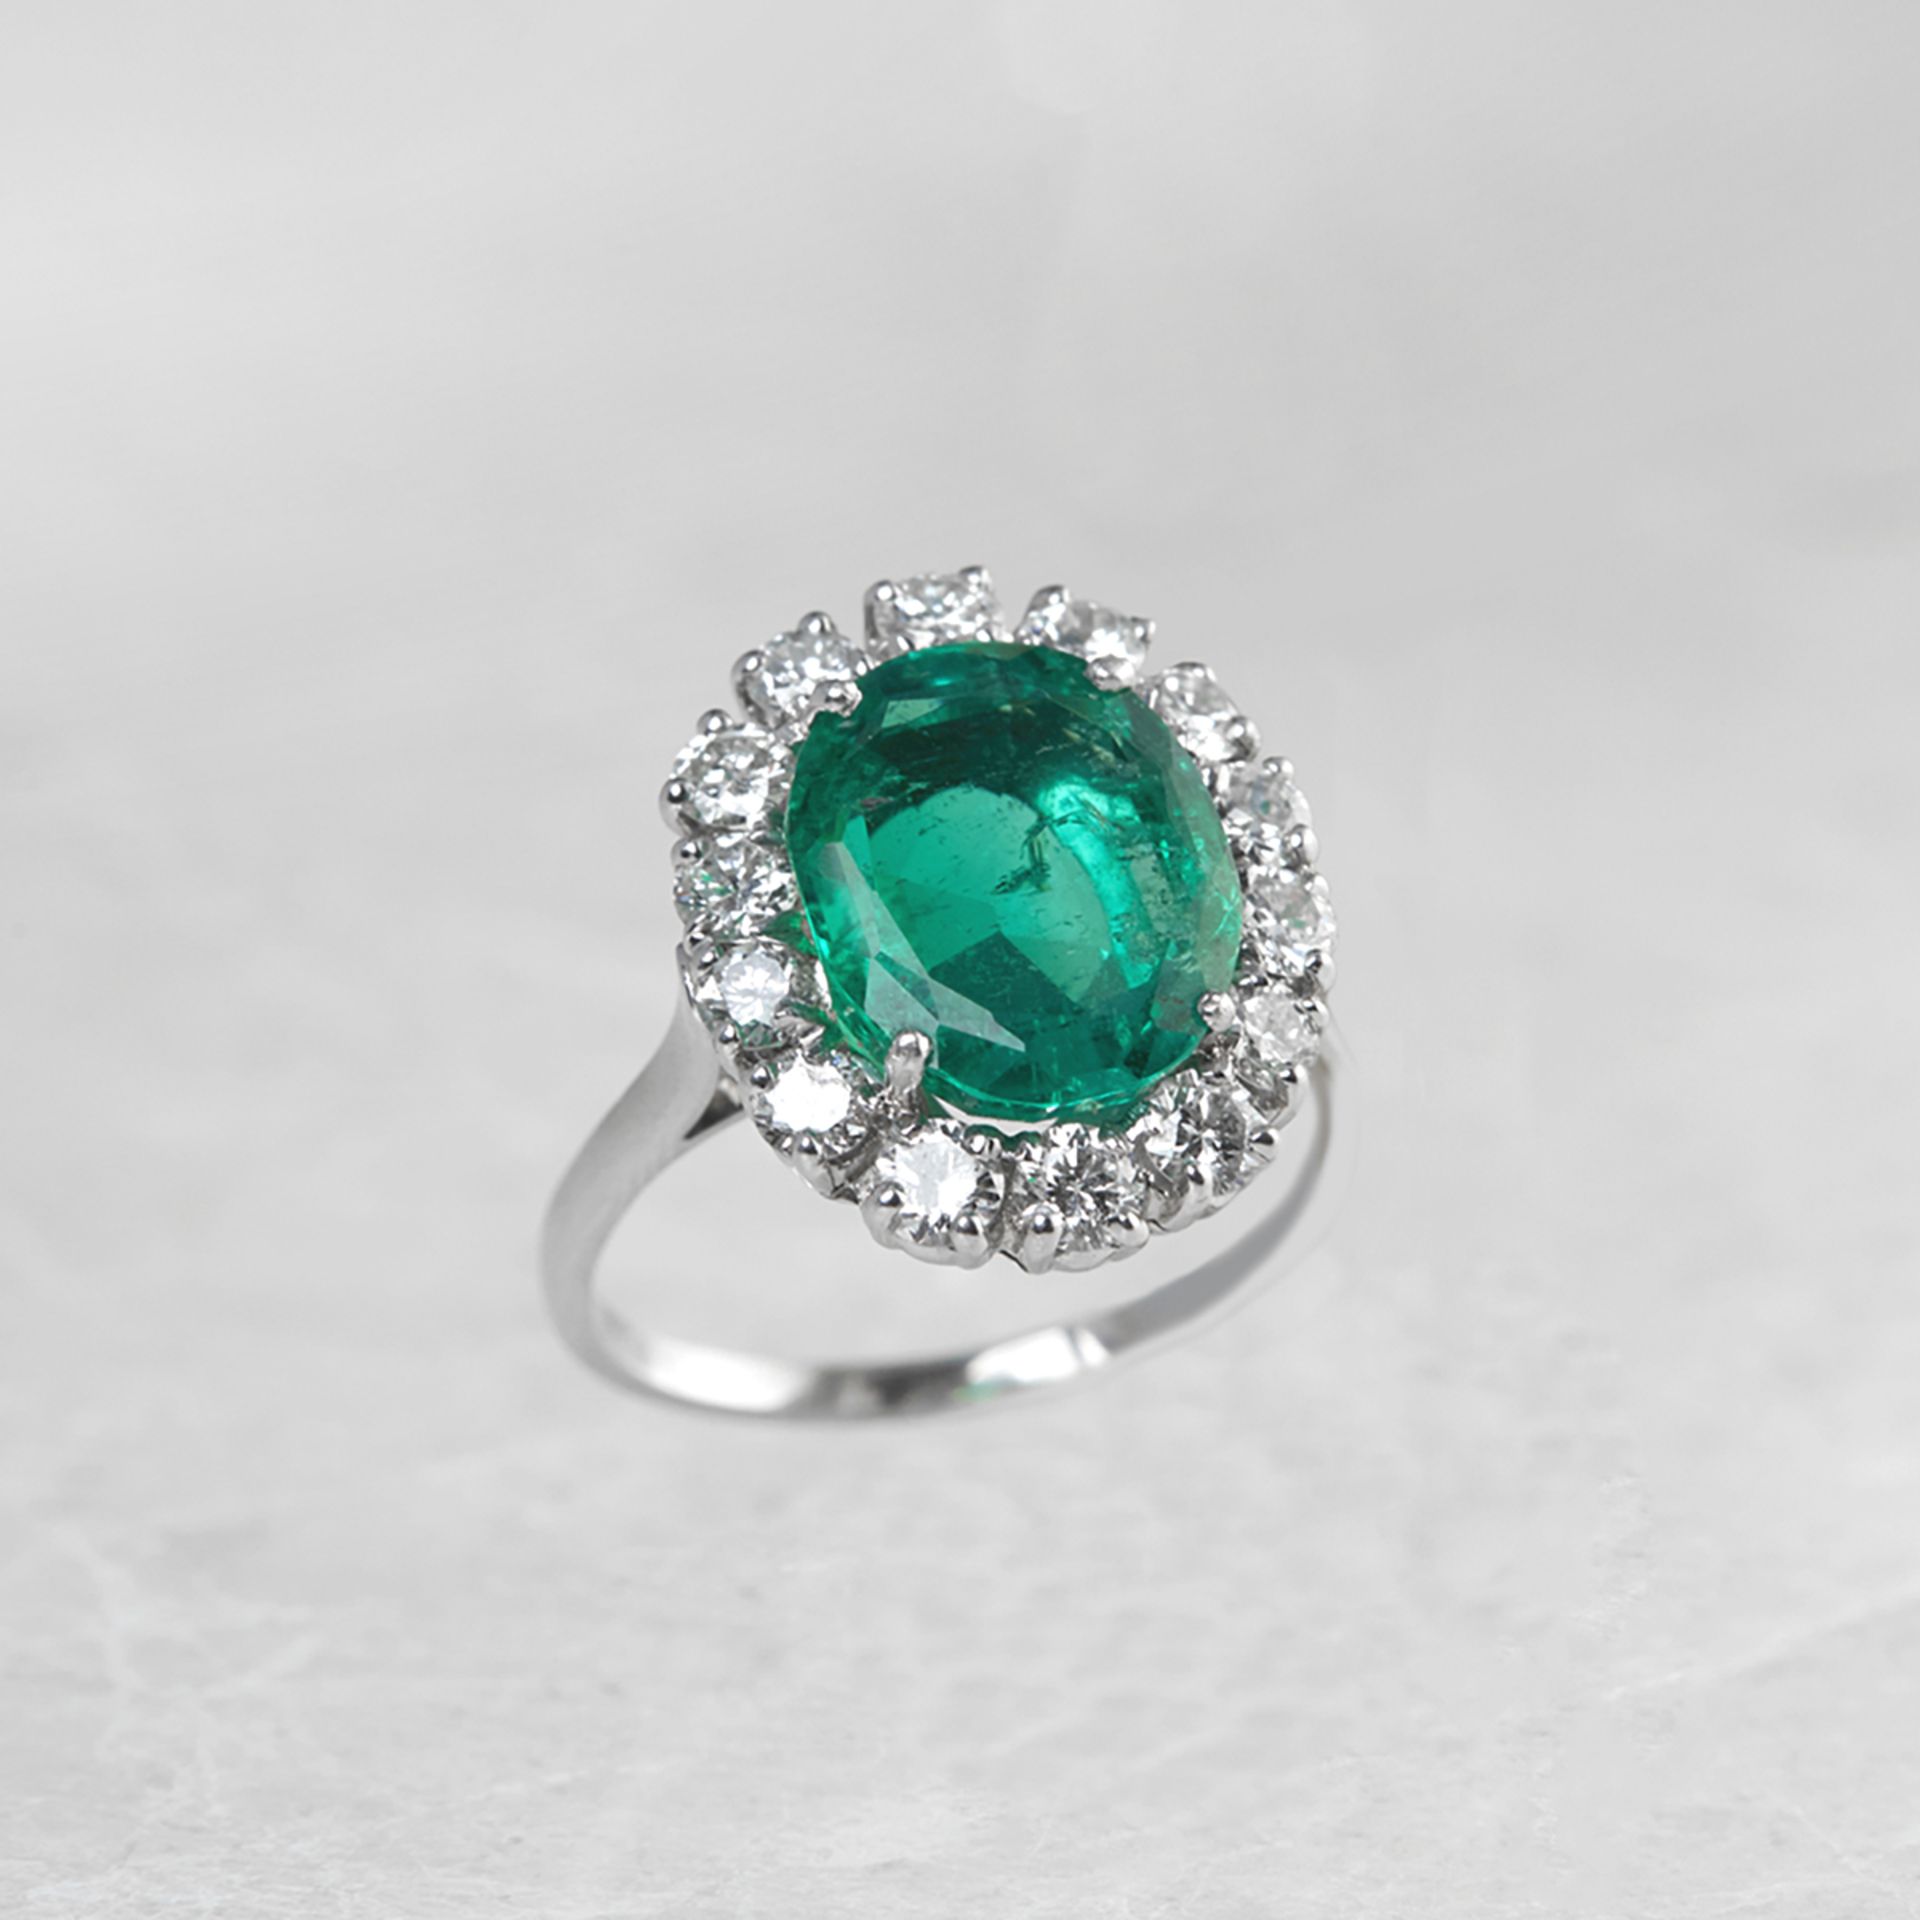 18k White Gold 4.60ct Colombian Emerald & 2.00ct Diamond Ring - Image 2 of 6